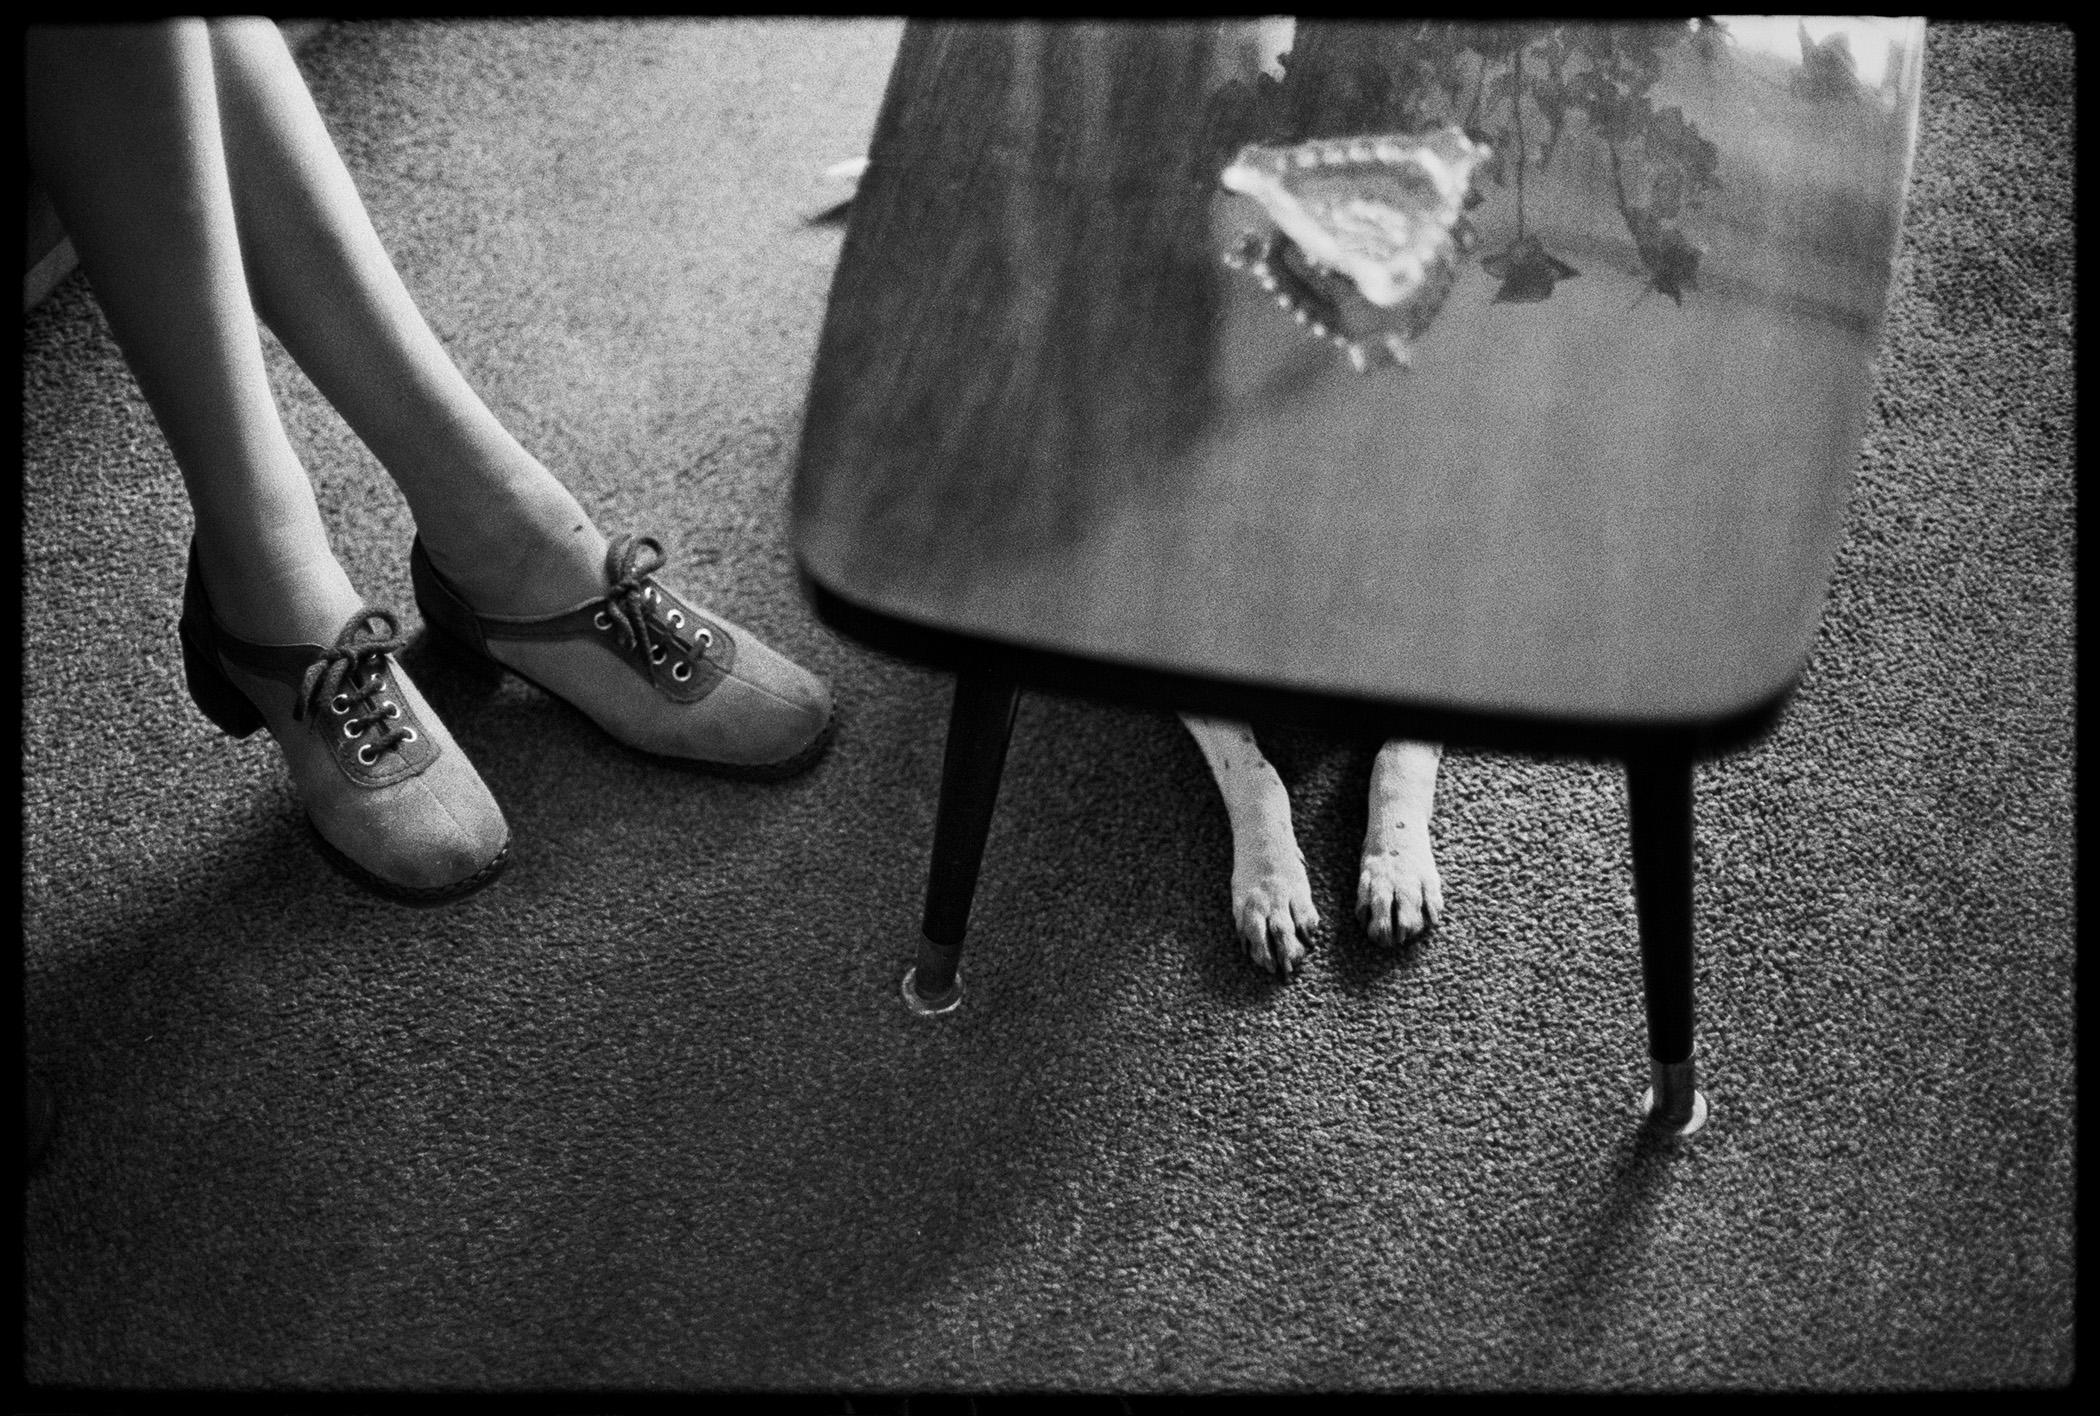 Elliott Erwitt Dogs photograph Amsterdam, 1973:
“Dogs have more to do than children. For one thing, they are forced to lead a life that is really schizoid. Every minute, they have to live on two planes at once, juggling the dog world against the